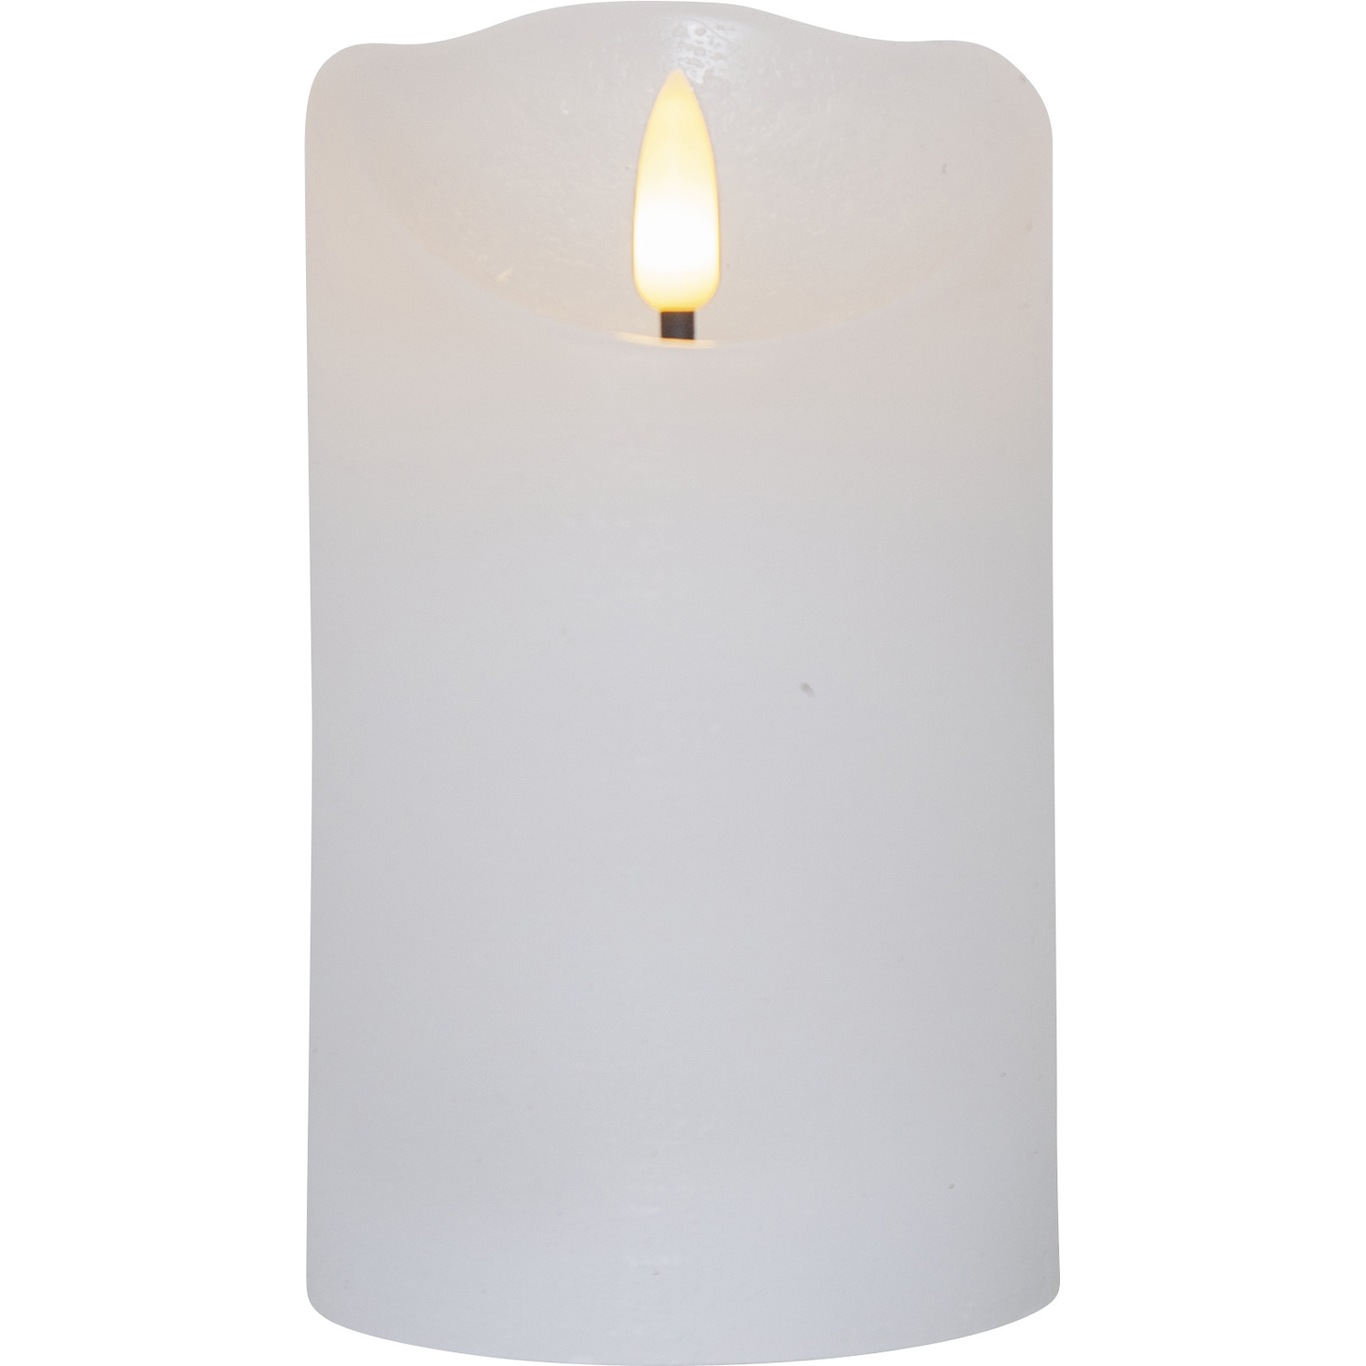 Flamme Rustic LED Pillar Candle White, 12 cm